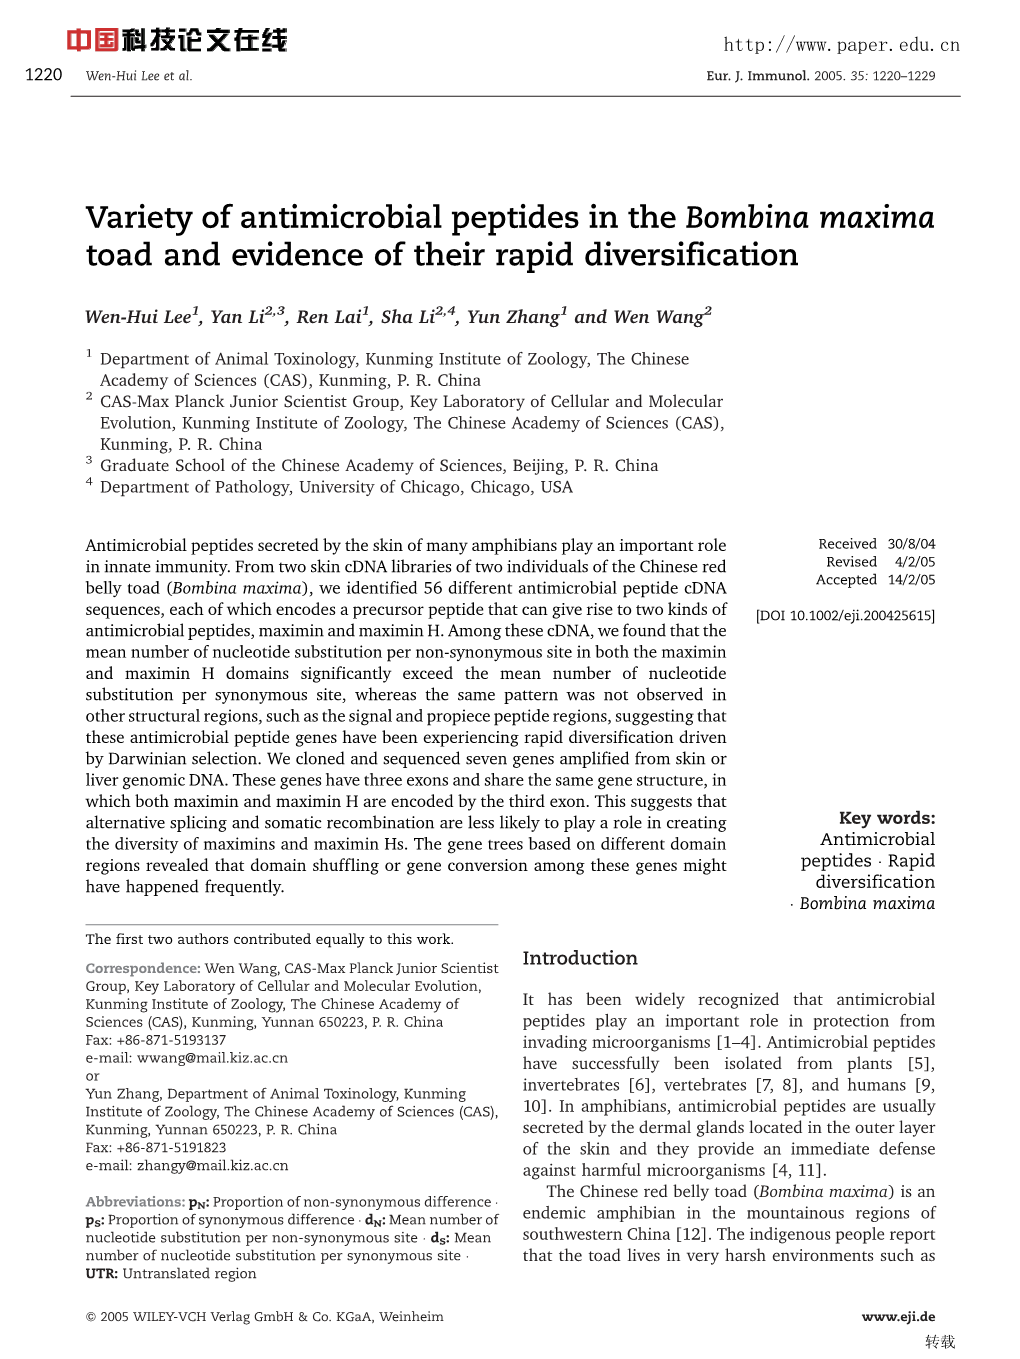 Variety of Antimicrobial Peptides in the Bombina Maxima Toad and Evidence of Their Rapid Diversification